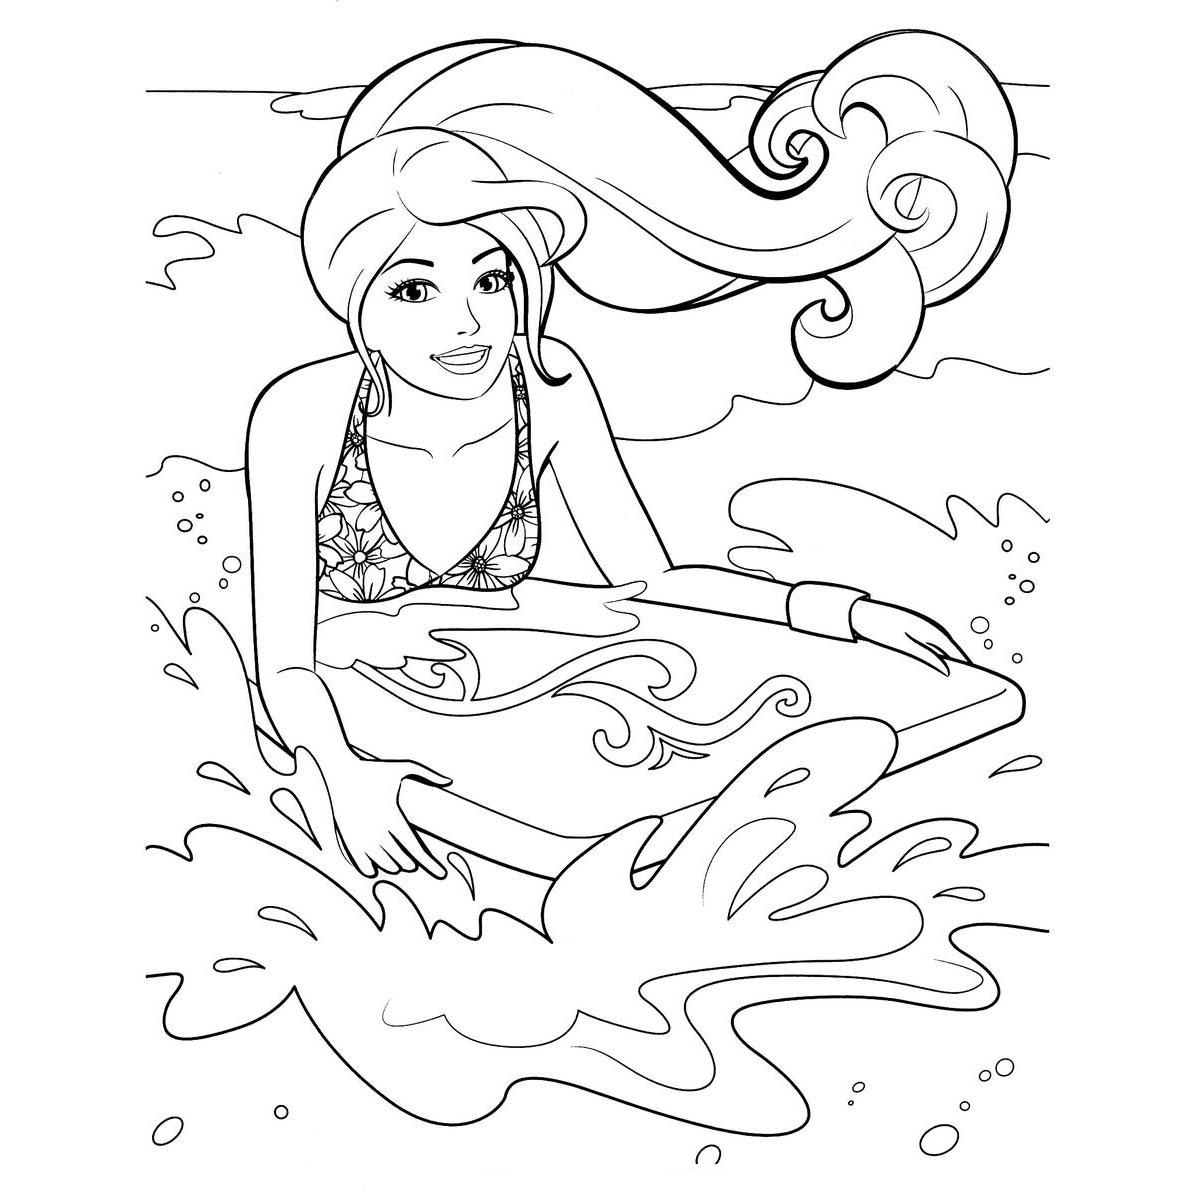 Surfing Coloring Pages   Best Coloring Pages For Kids